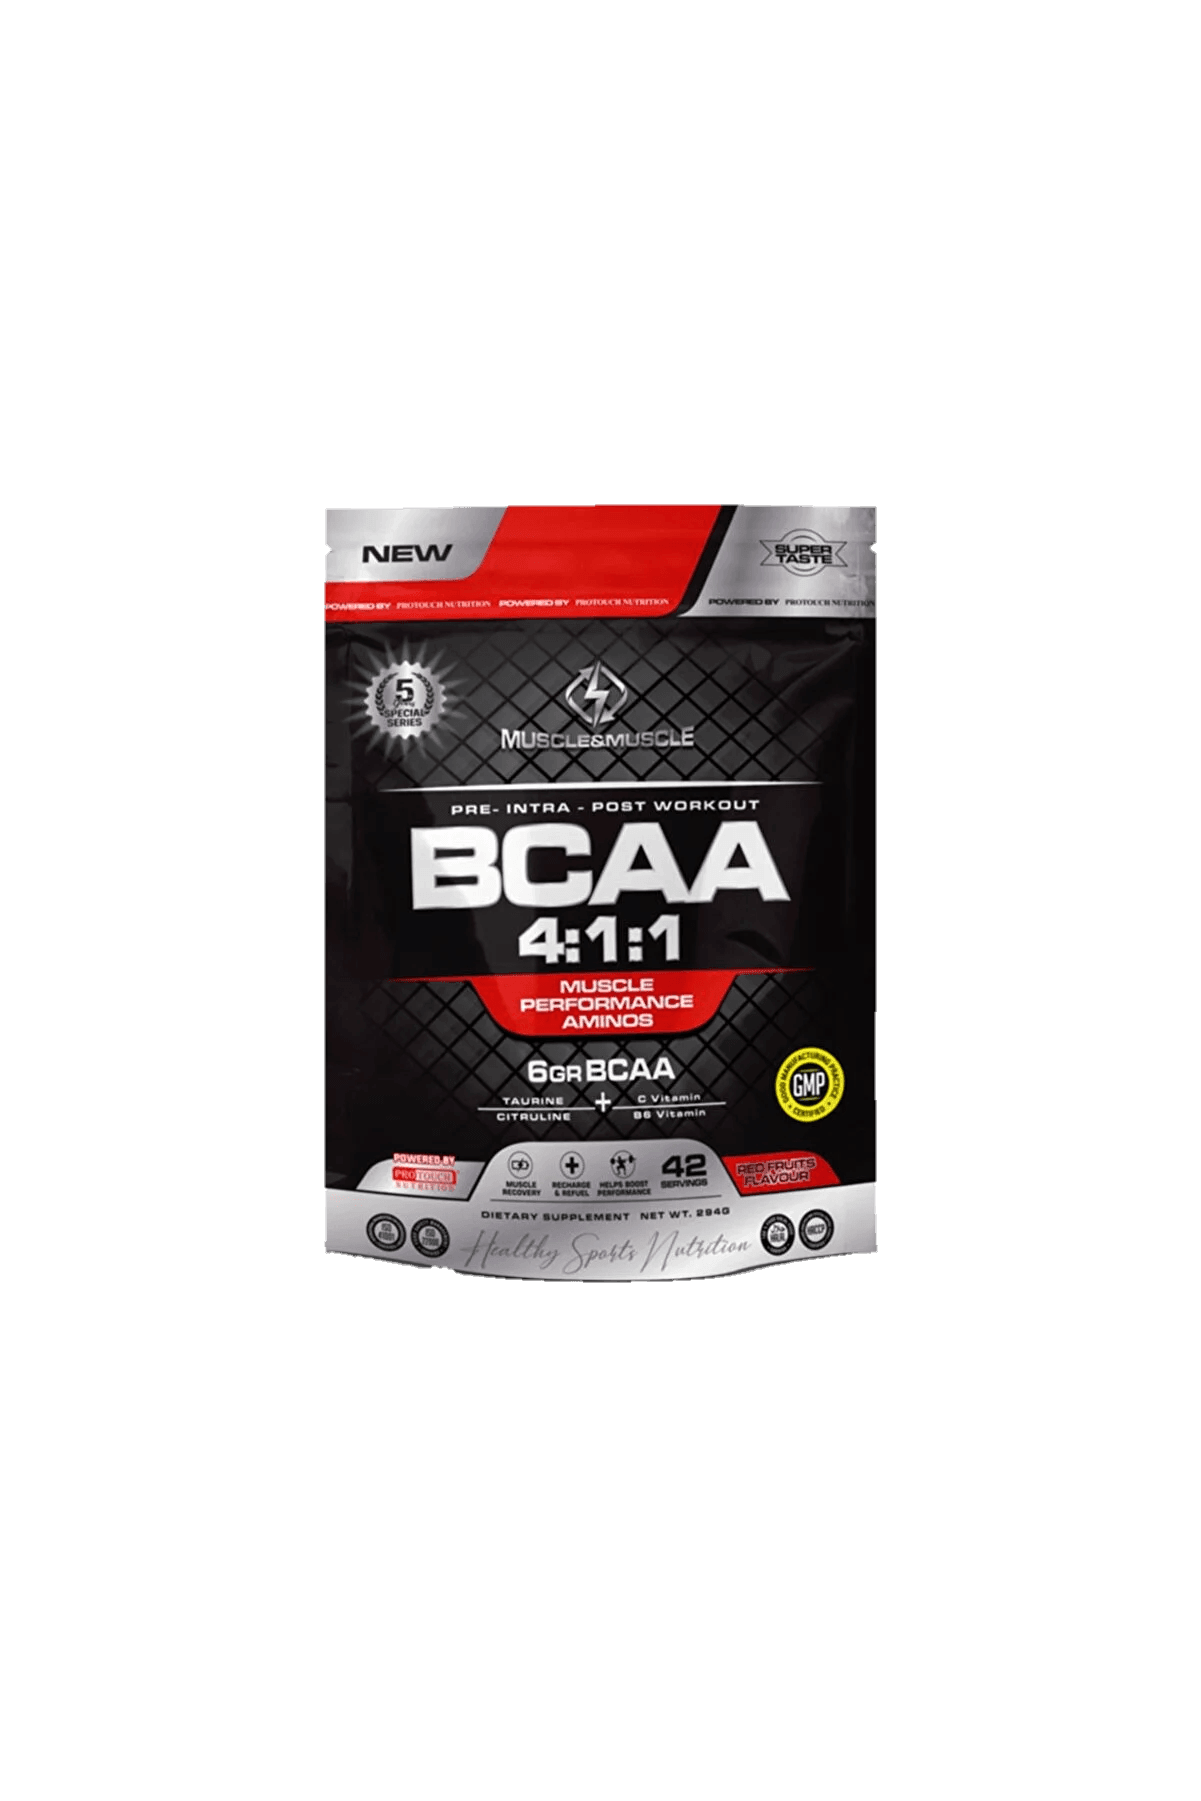 Muscle&Muscle BCAA - The Supplements Factory